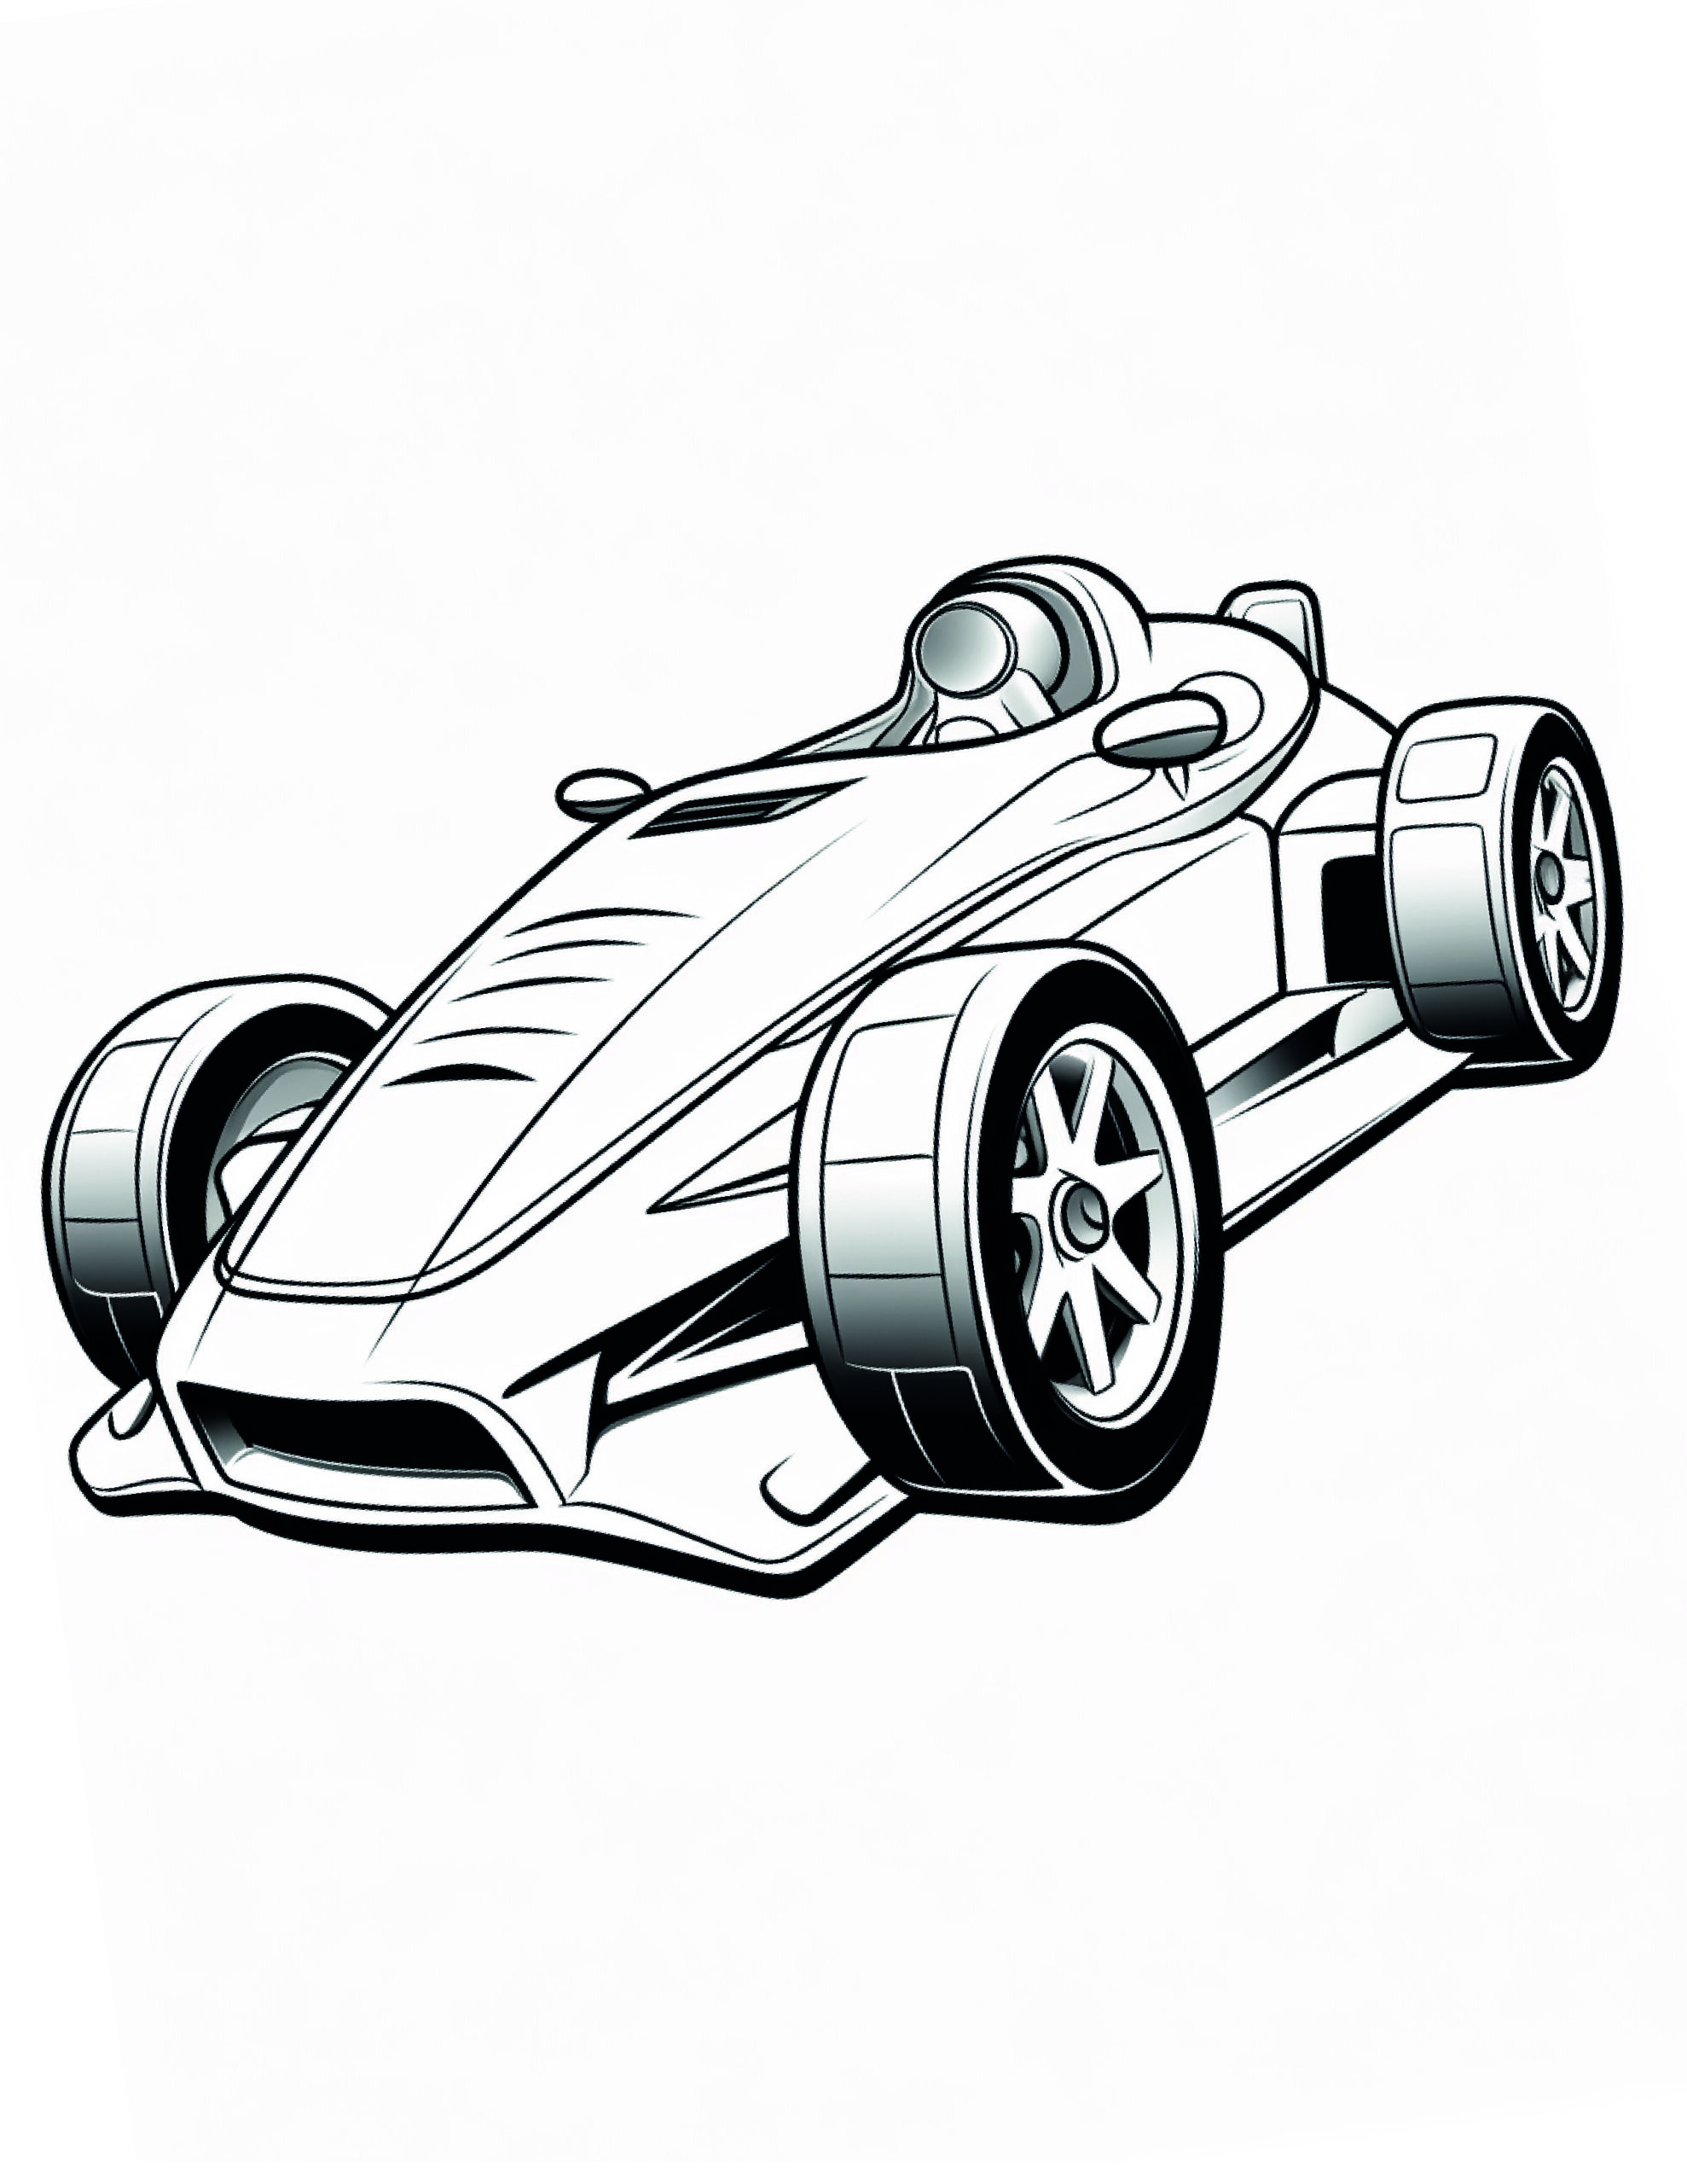 Race Car Coloring Page 10 - A line drawing of a formula one car with no front wing.